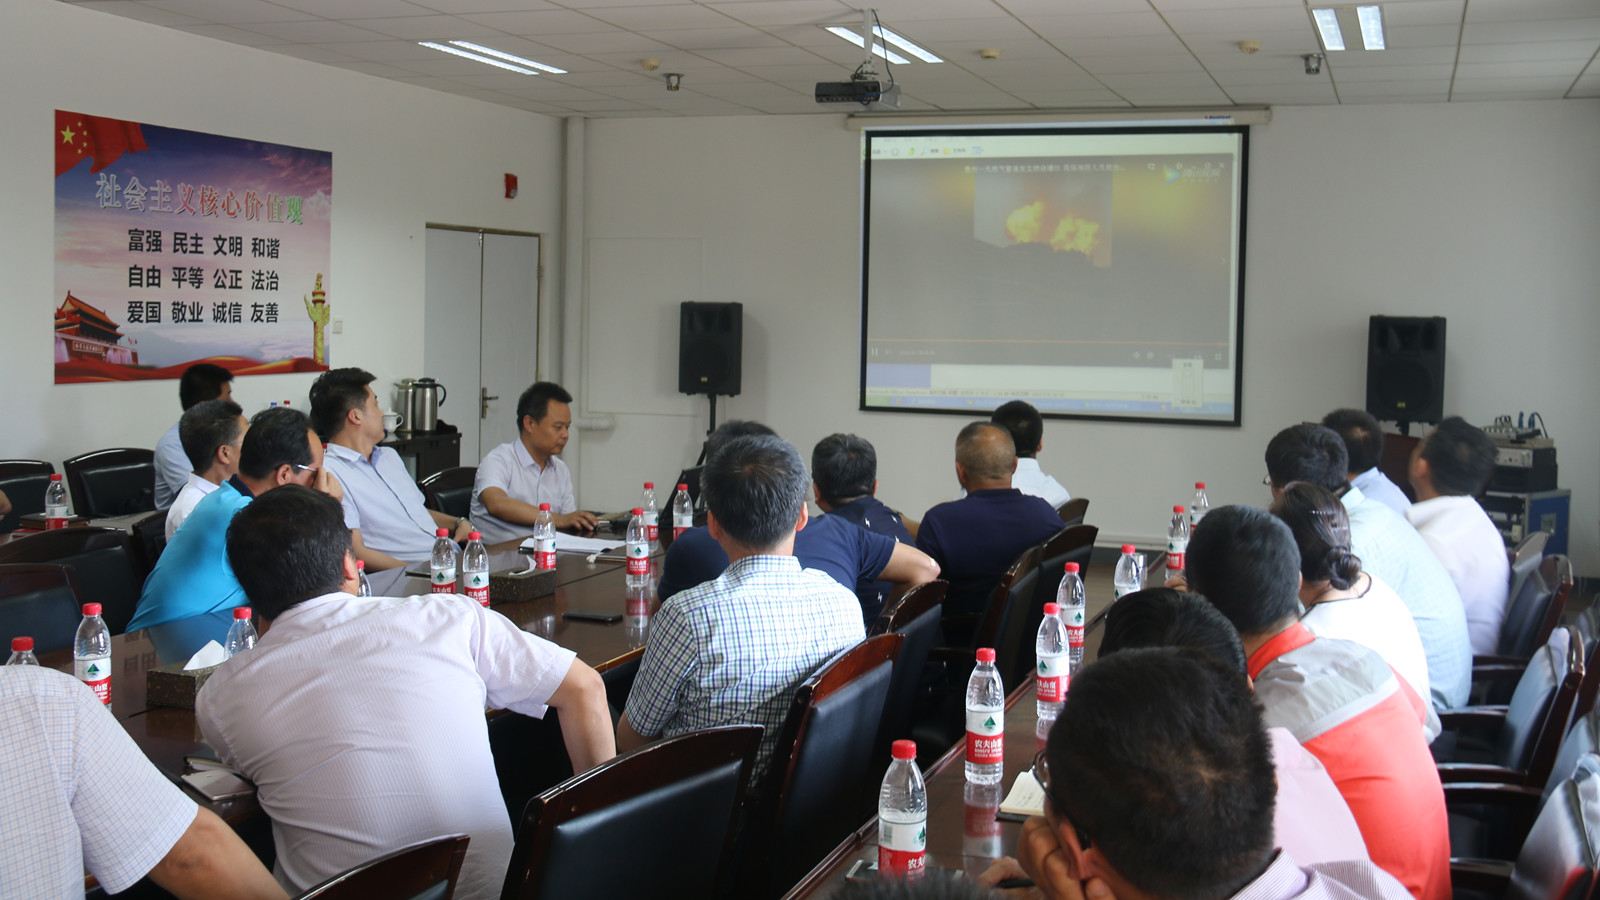 Draw lessons from accidents and pay close attention to production safety – the company held a safety conference to inform and summarize the lessons learned from the gas explosion in Jilin and Jilin